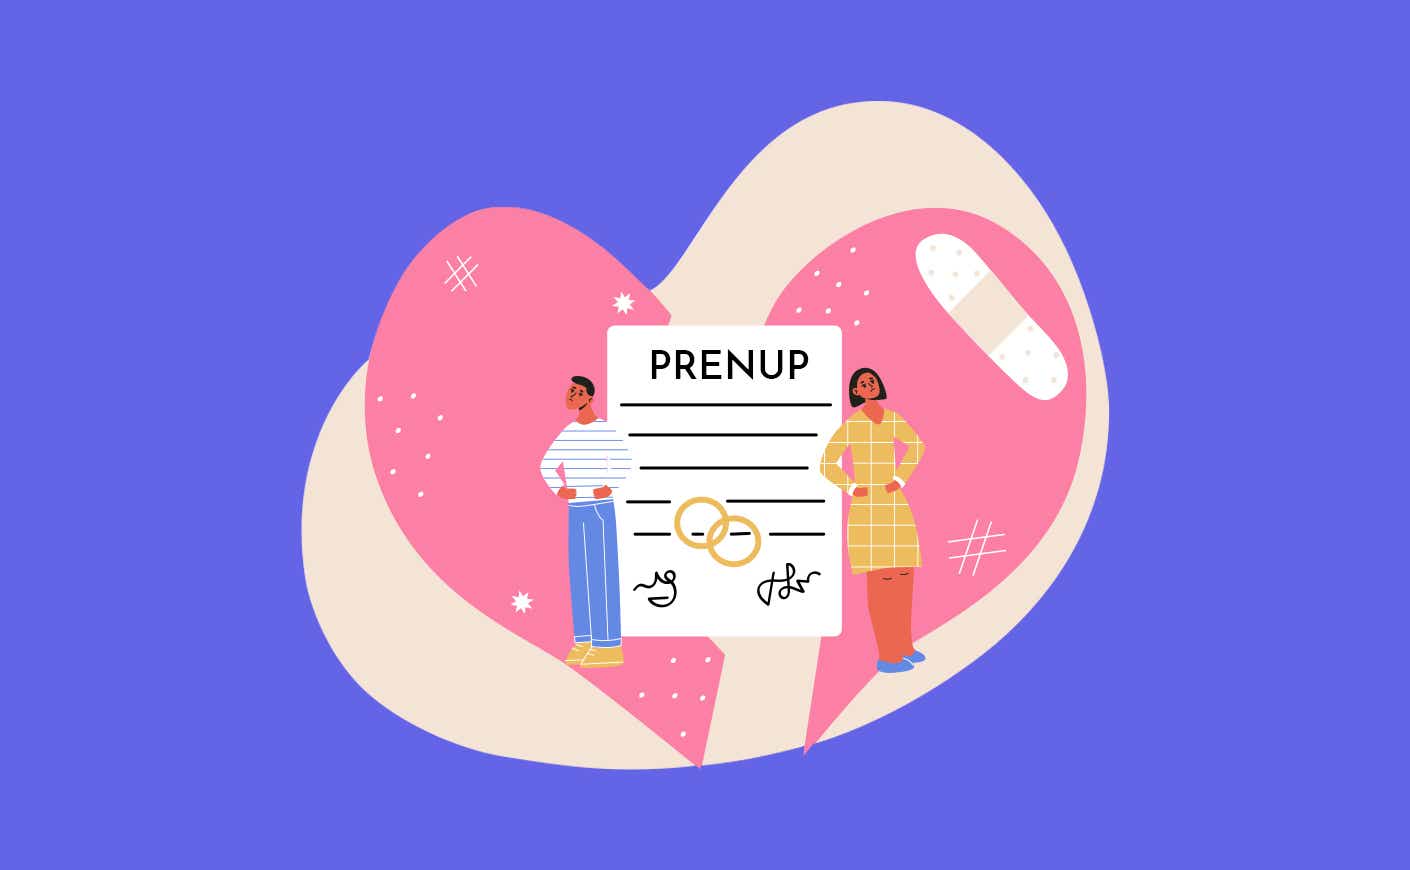 illustration of a couple standing on either side of a prenup contract